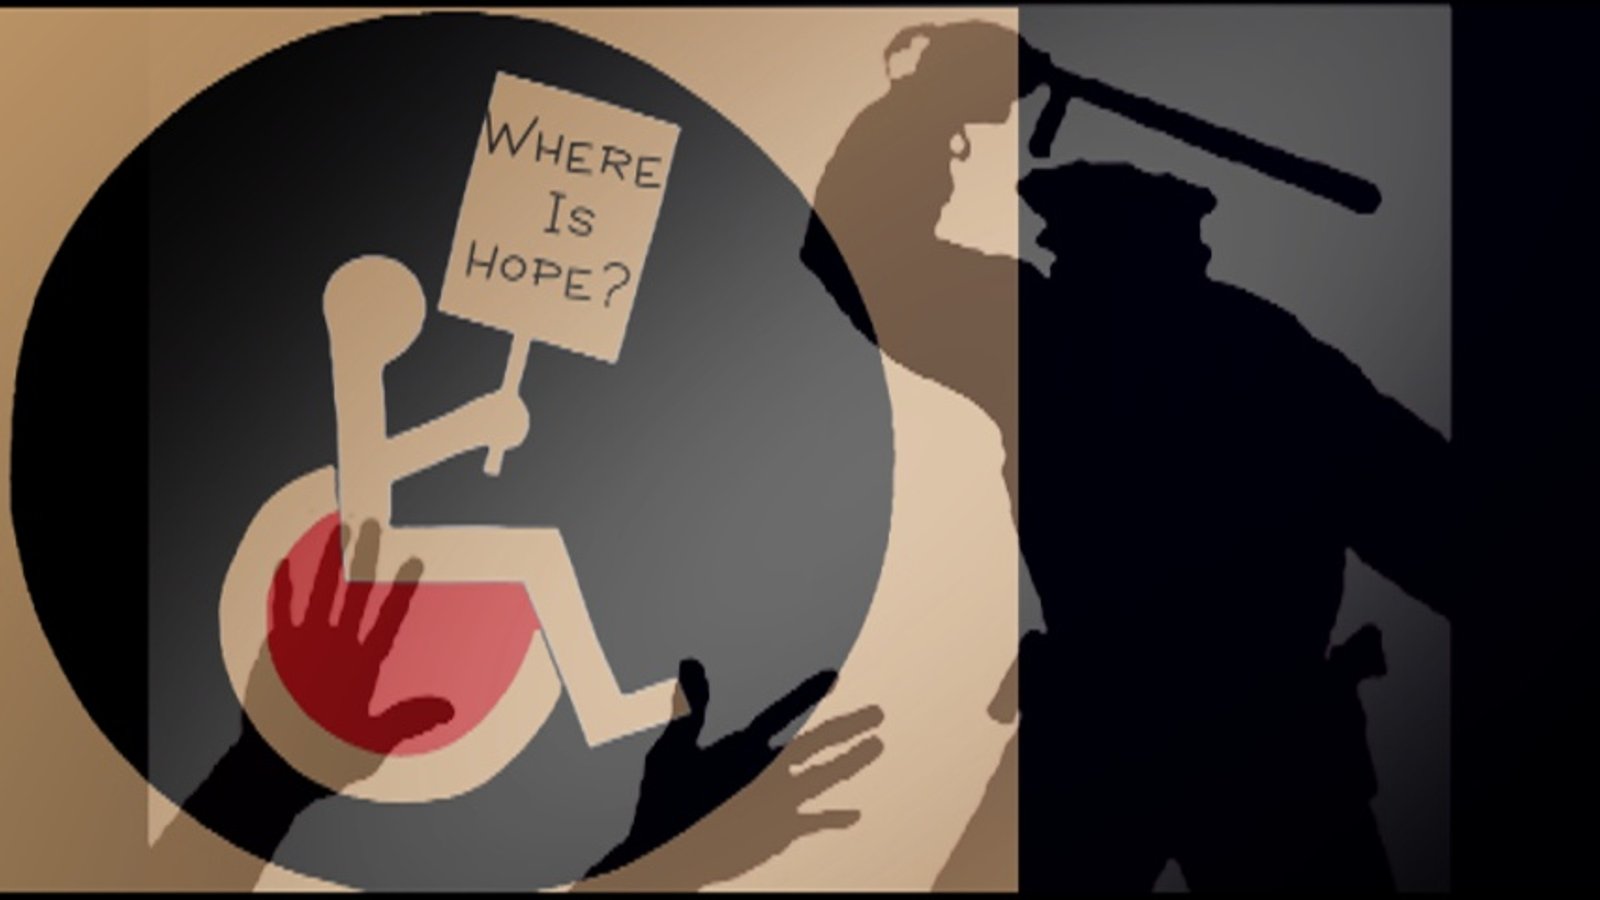 Where Is Hope - The Art of Murder - Police Brutality Against People With Disabilities